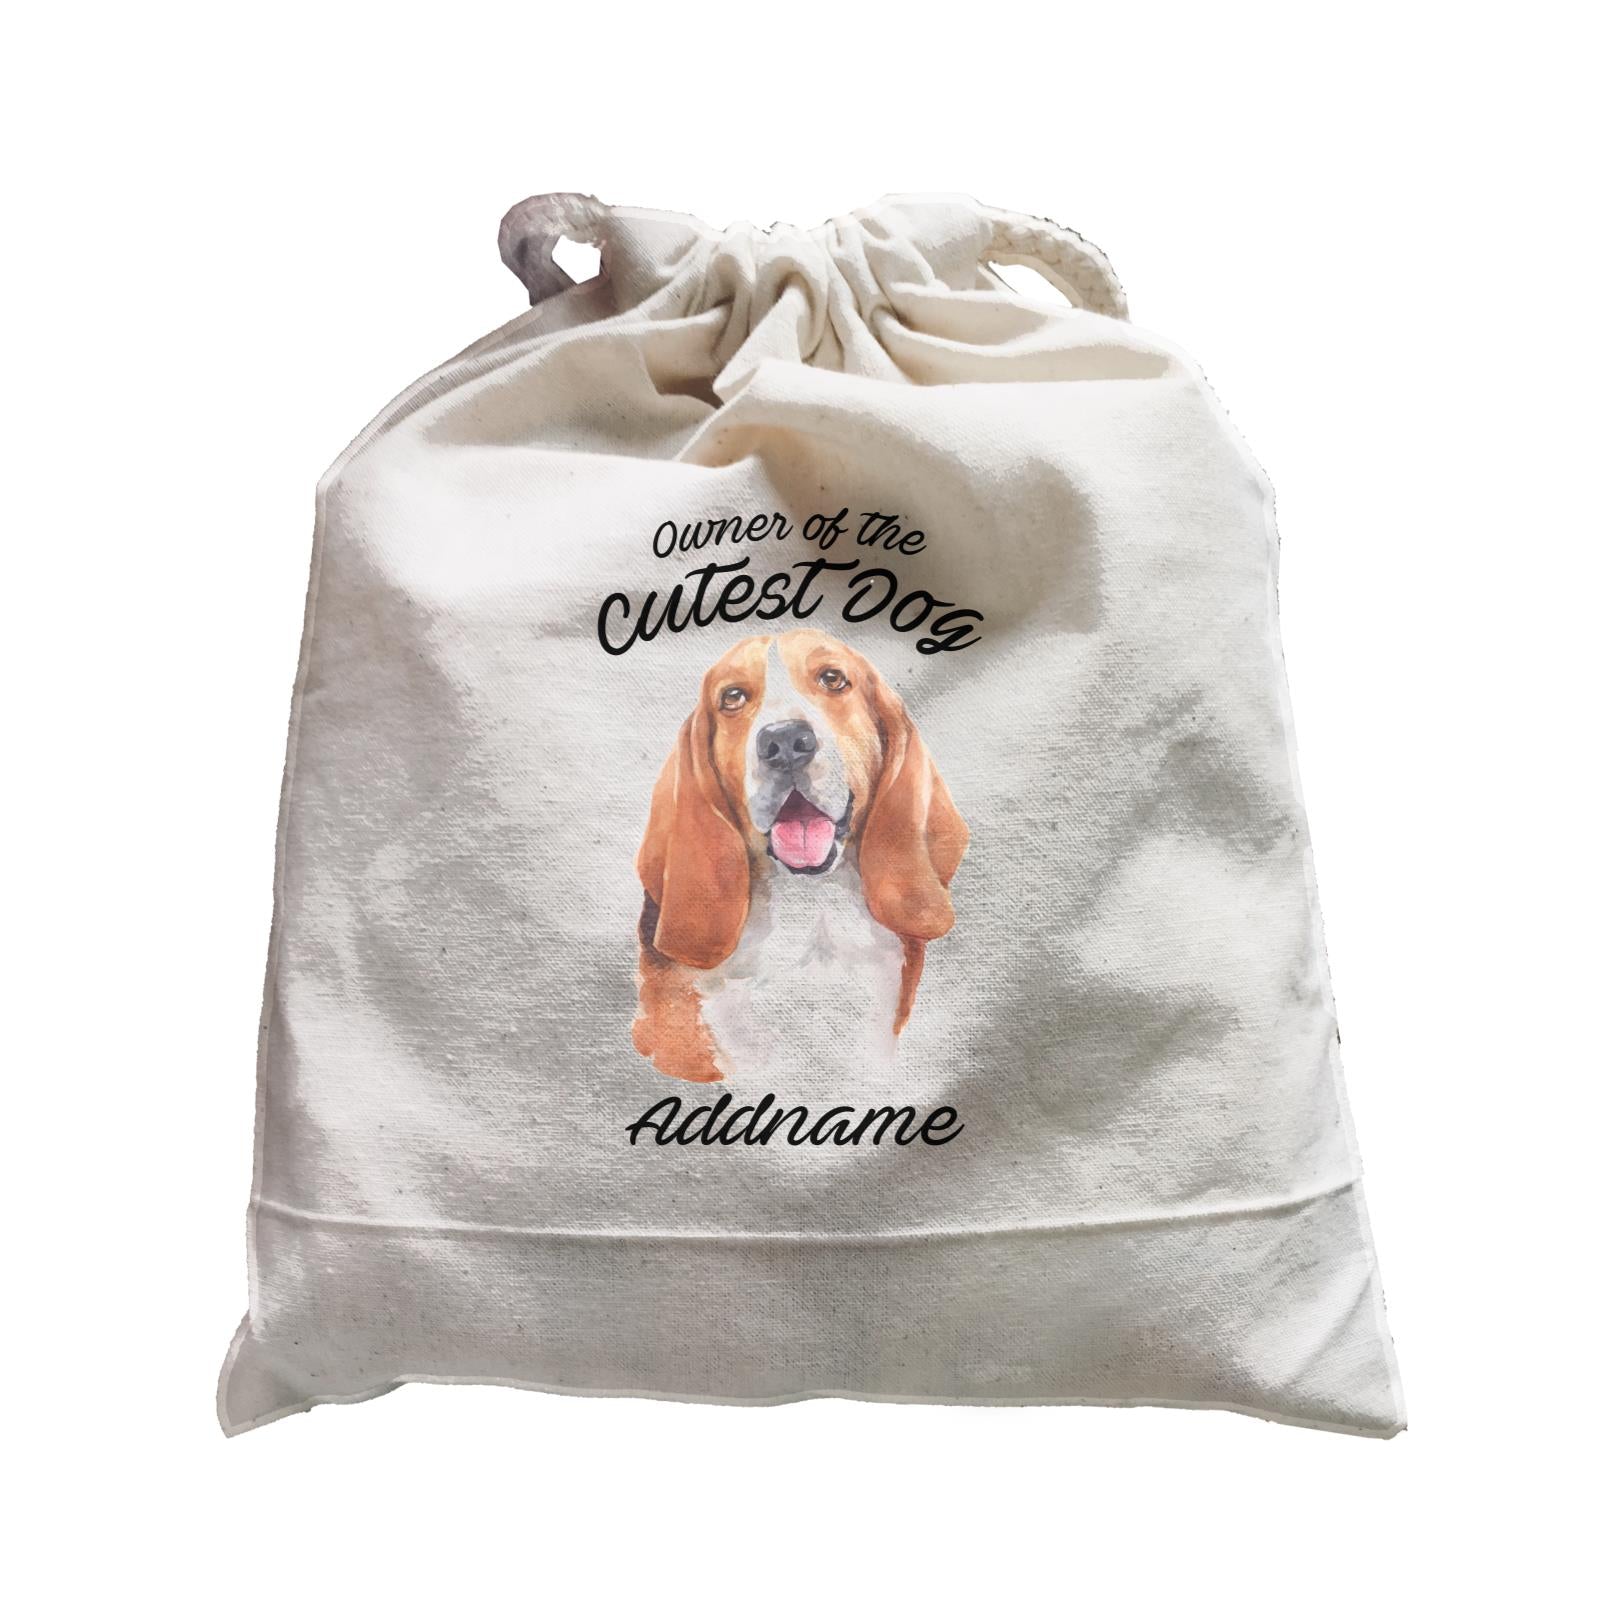 Watercolor Dog Owner Of The Cutest Dog Basset Hound Addname Satchel